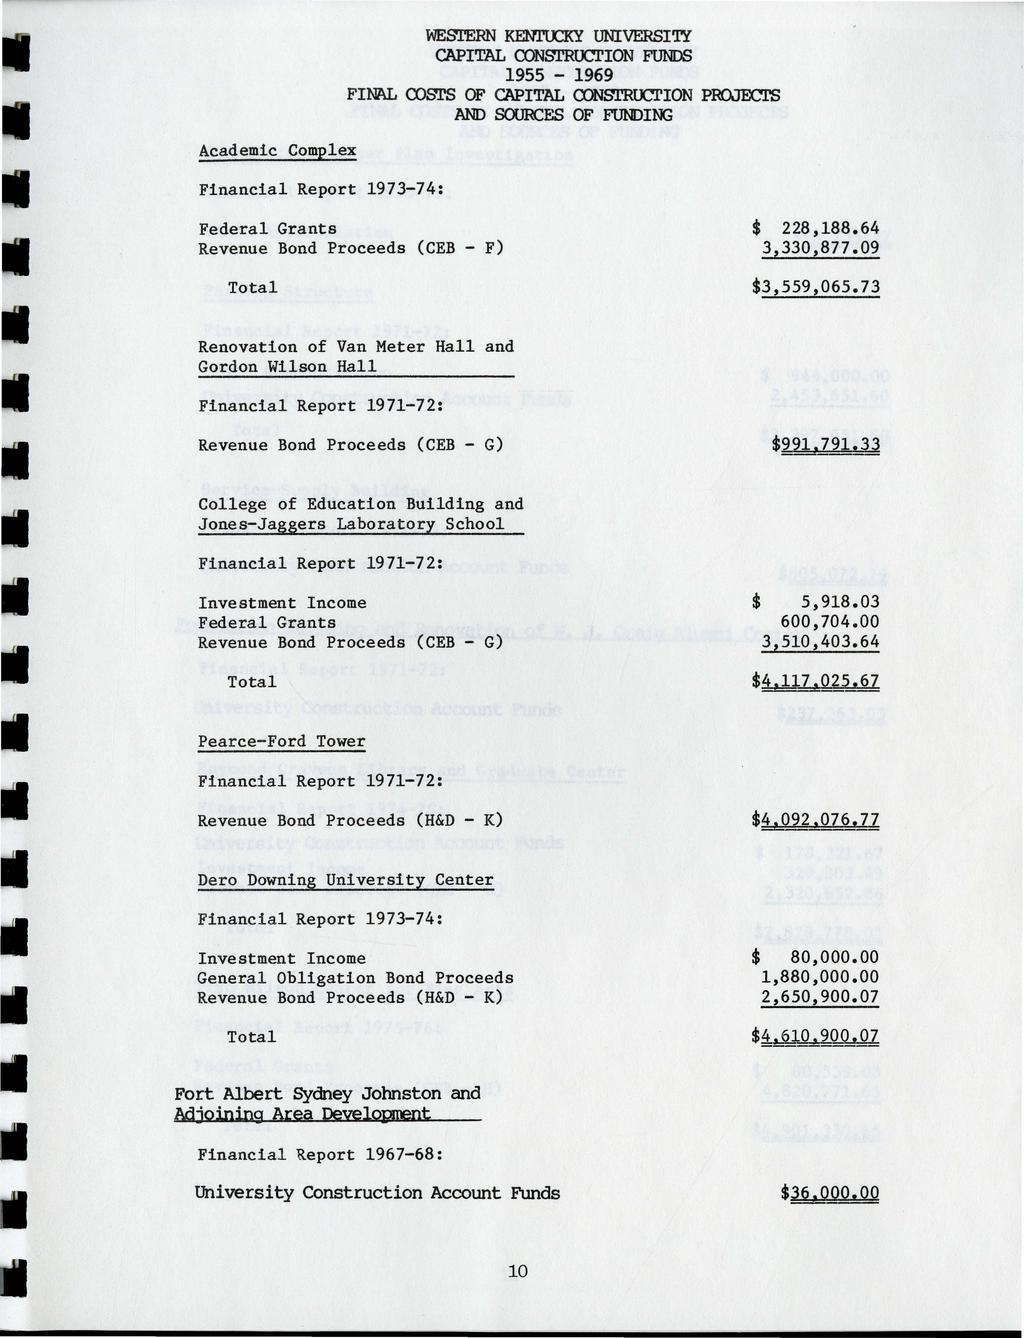 . Academic Complex Financial Report 1973-74: WESI'ERN KEN1'OCKY UNIVERSITY CAPITAL CONSI'RUCI'ION FUNDS FINAL OOSTS OF CAPITAL CON:>.